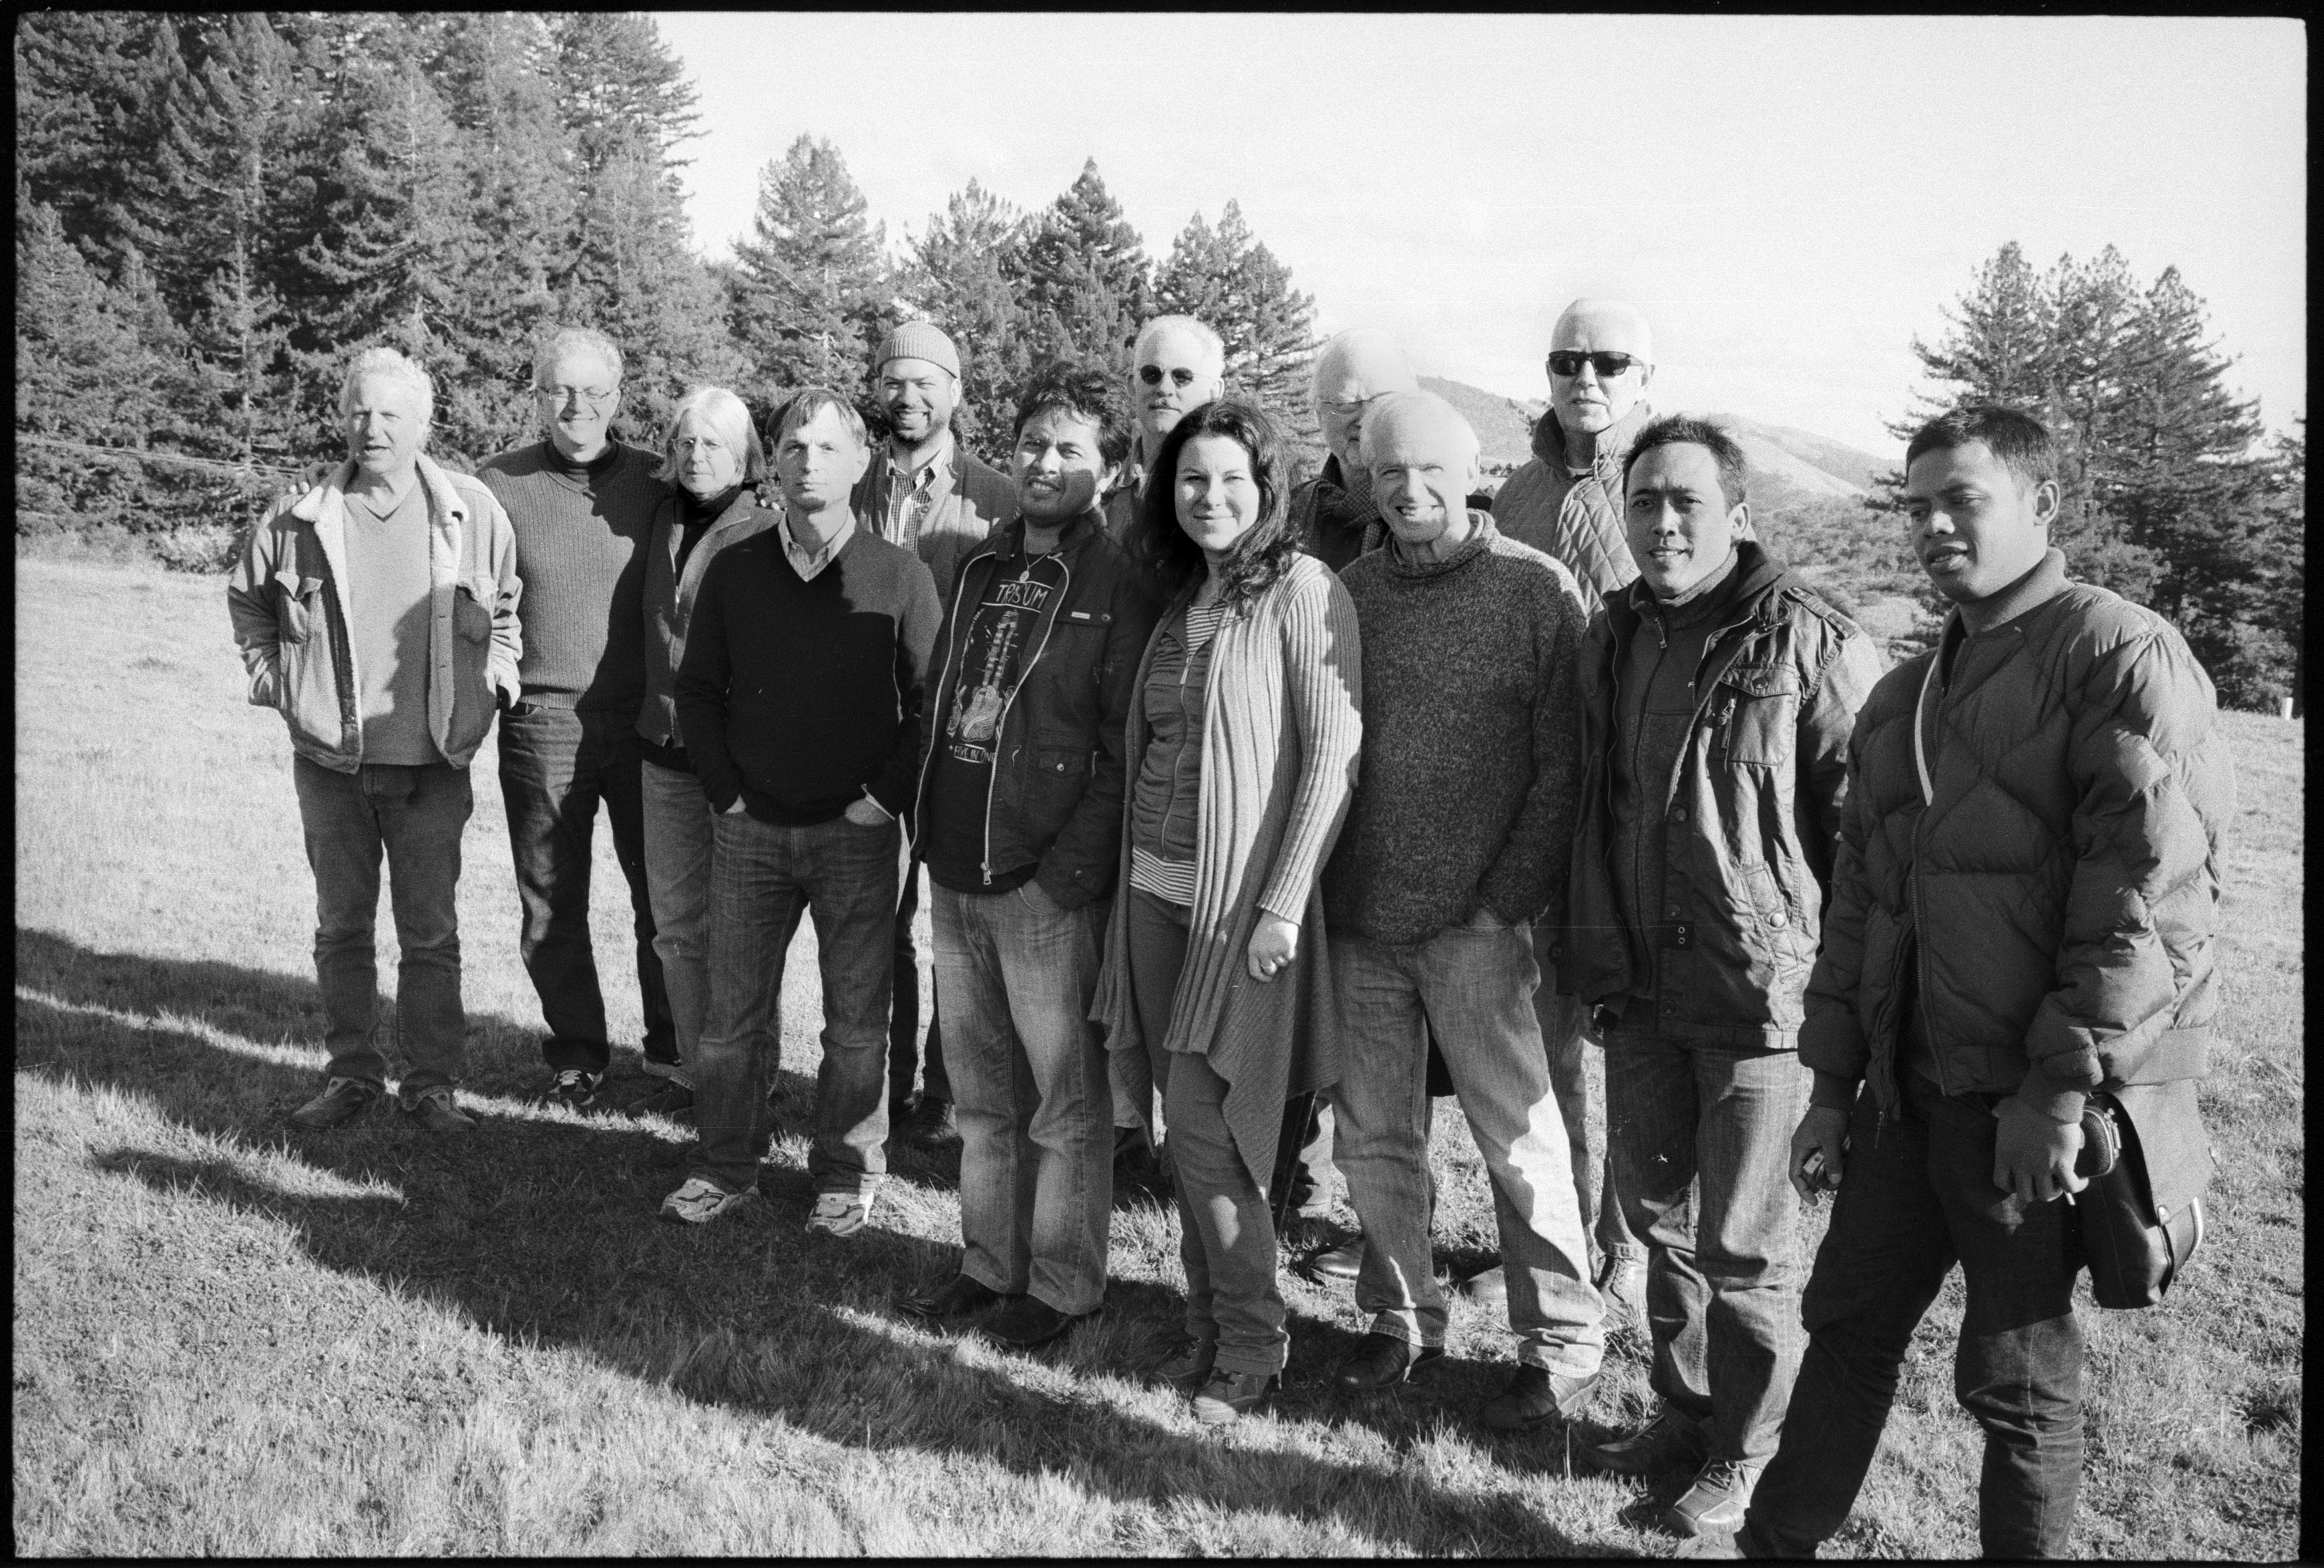 OM 16 Composers at the Djerassi Resident Artists Program